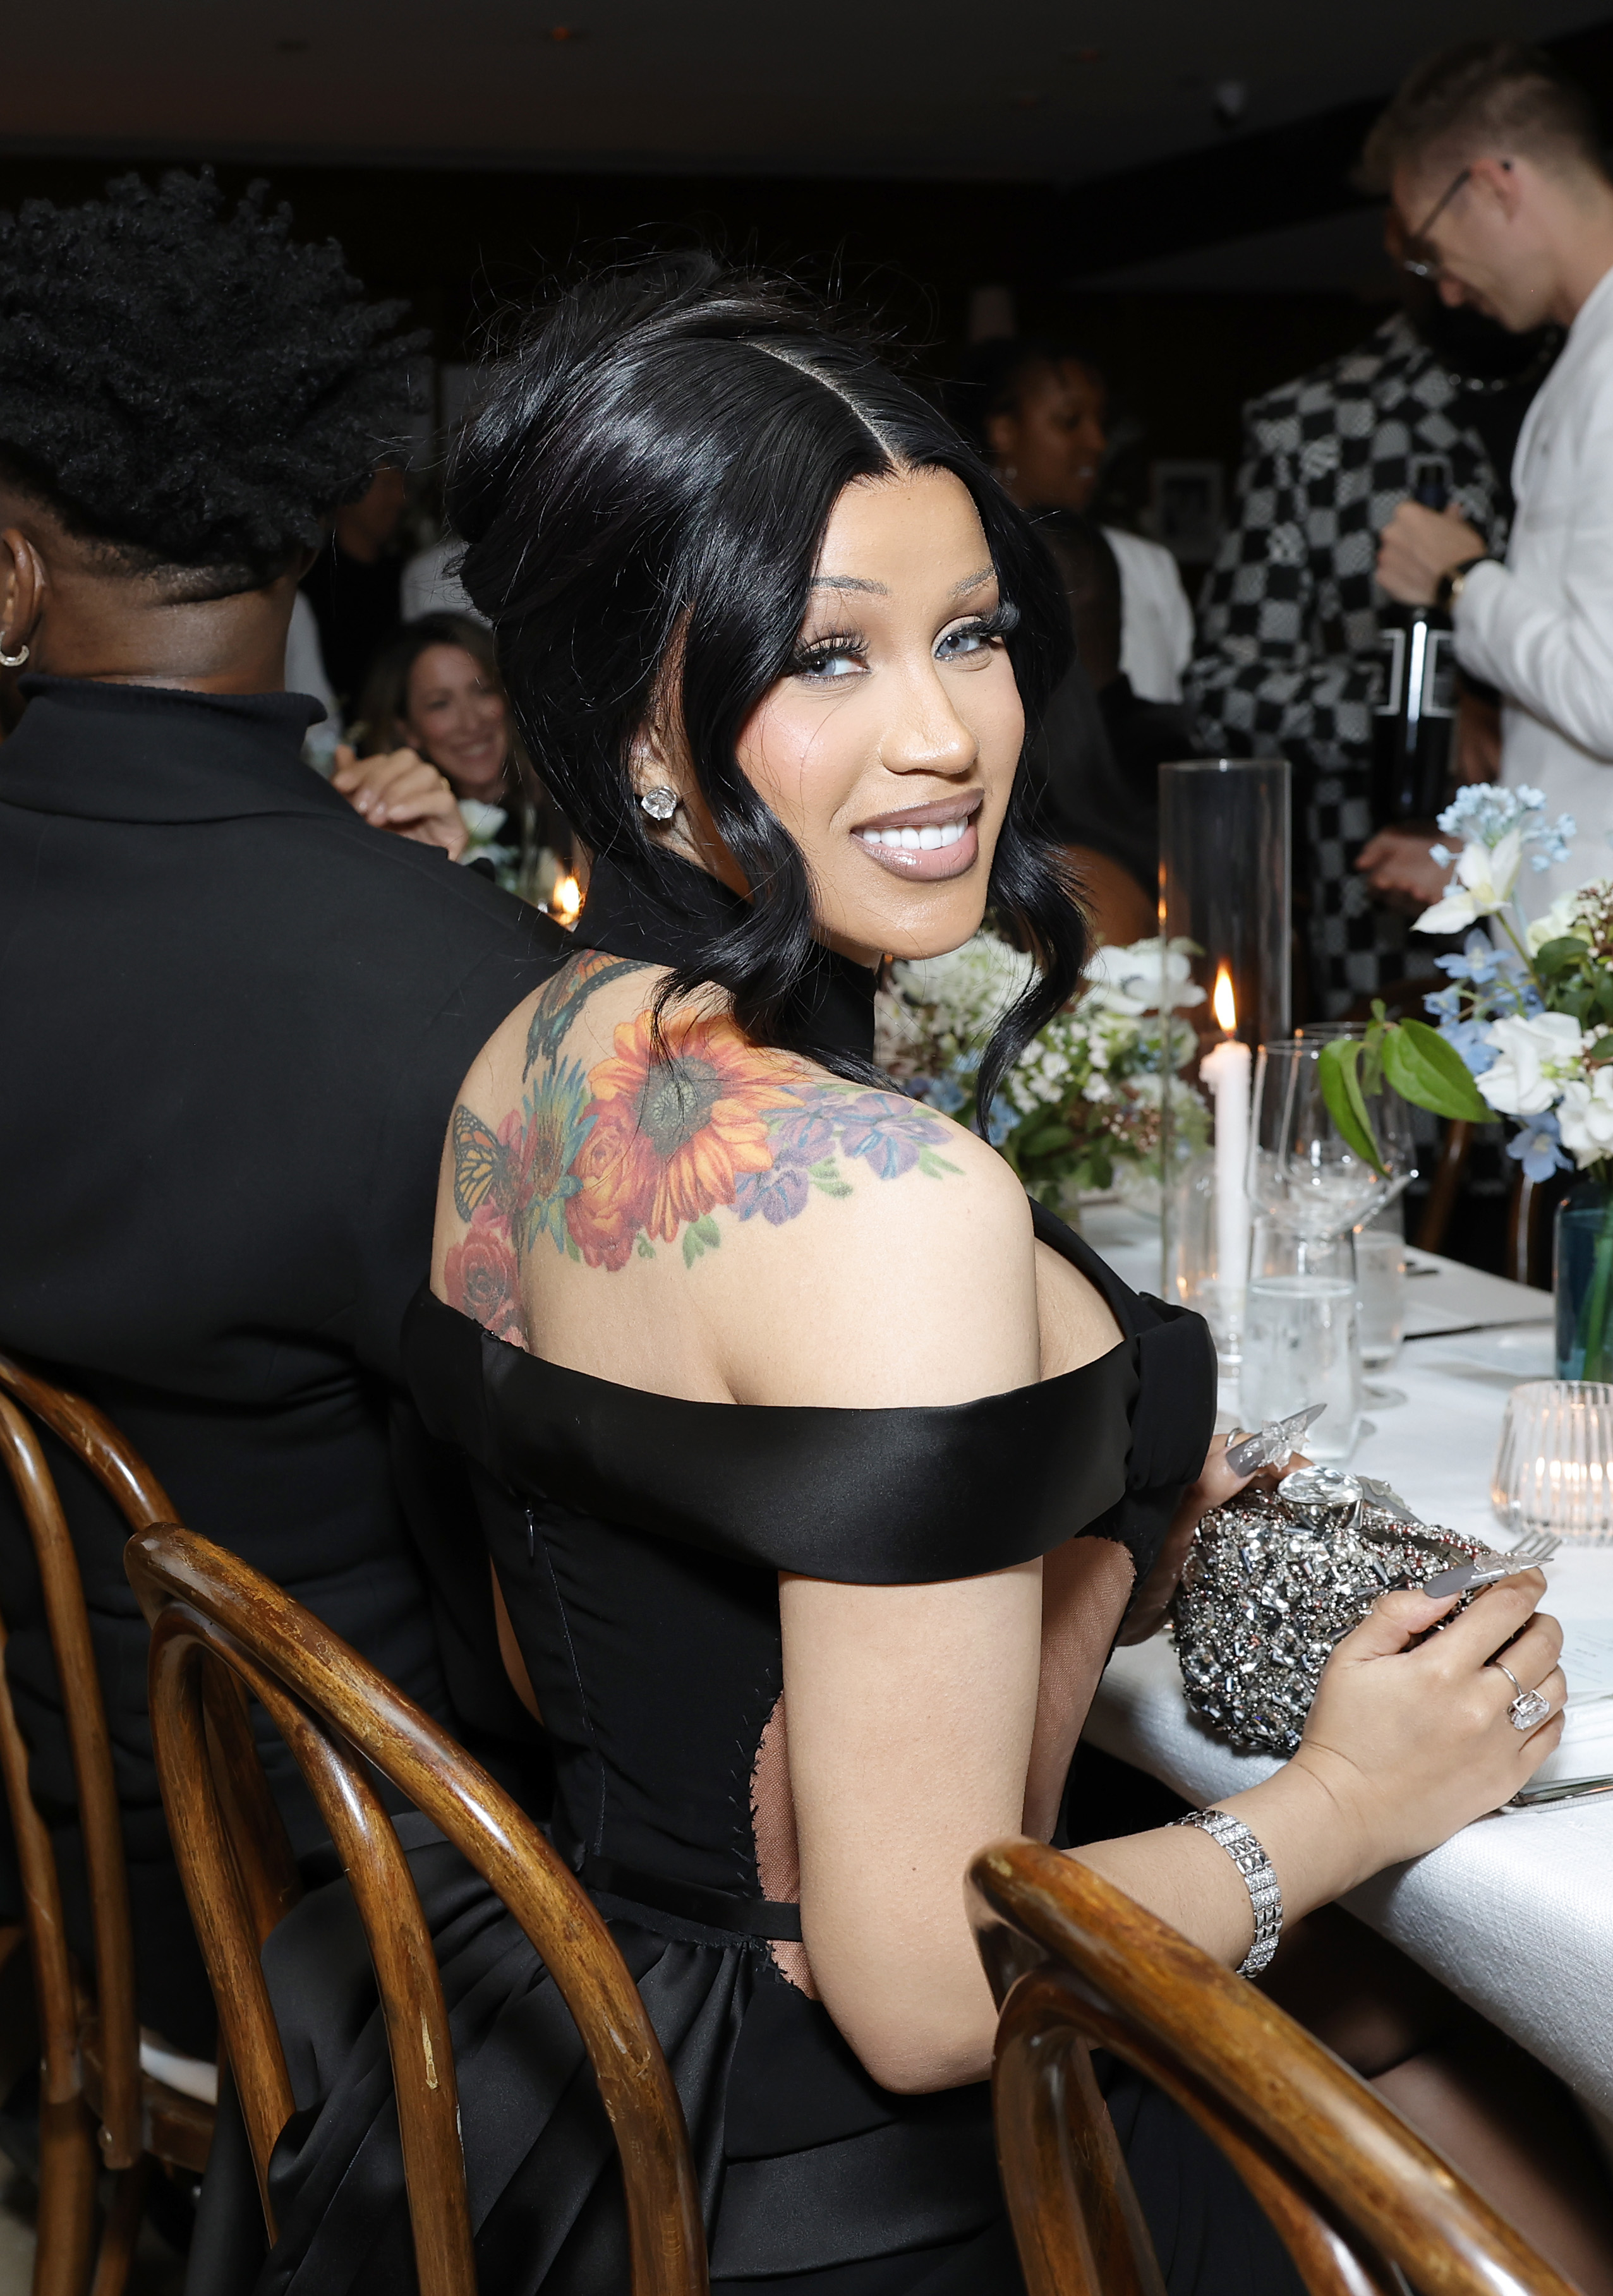 Cardi B in a black off-shoulder gown with floral tattoo visible, smiling at an event